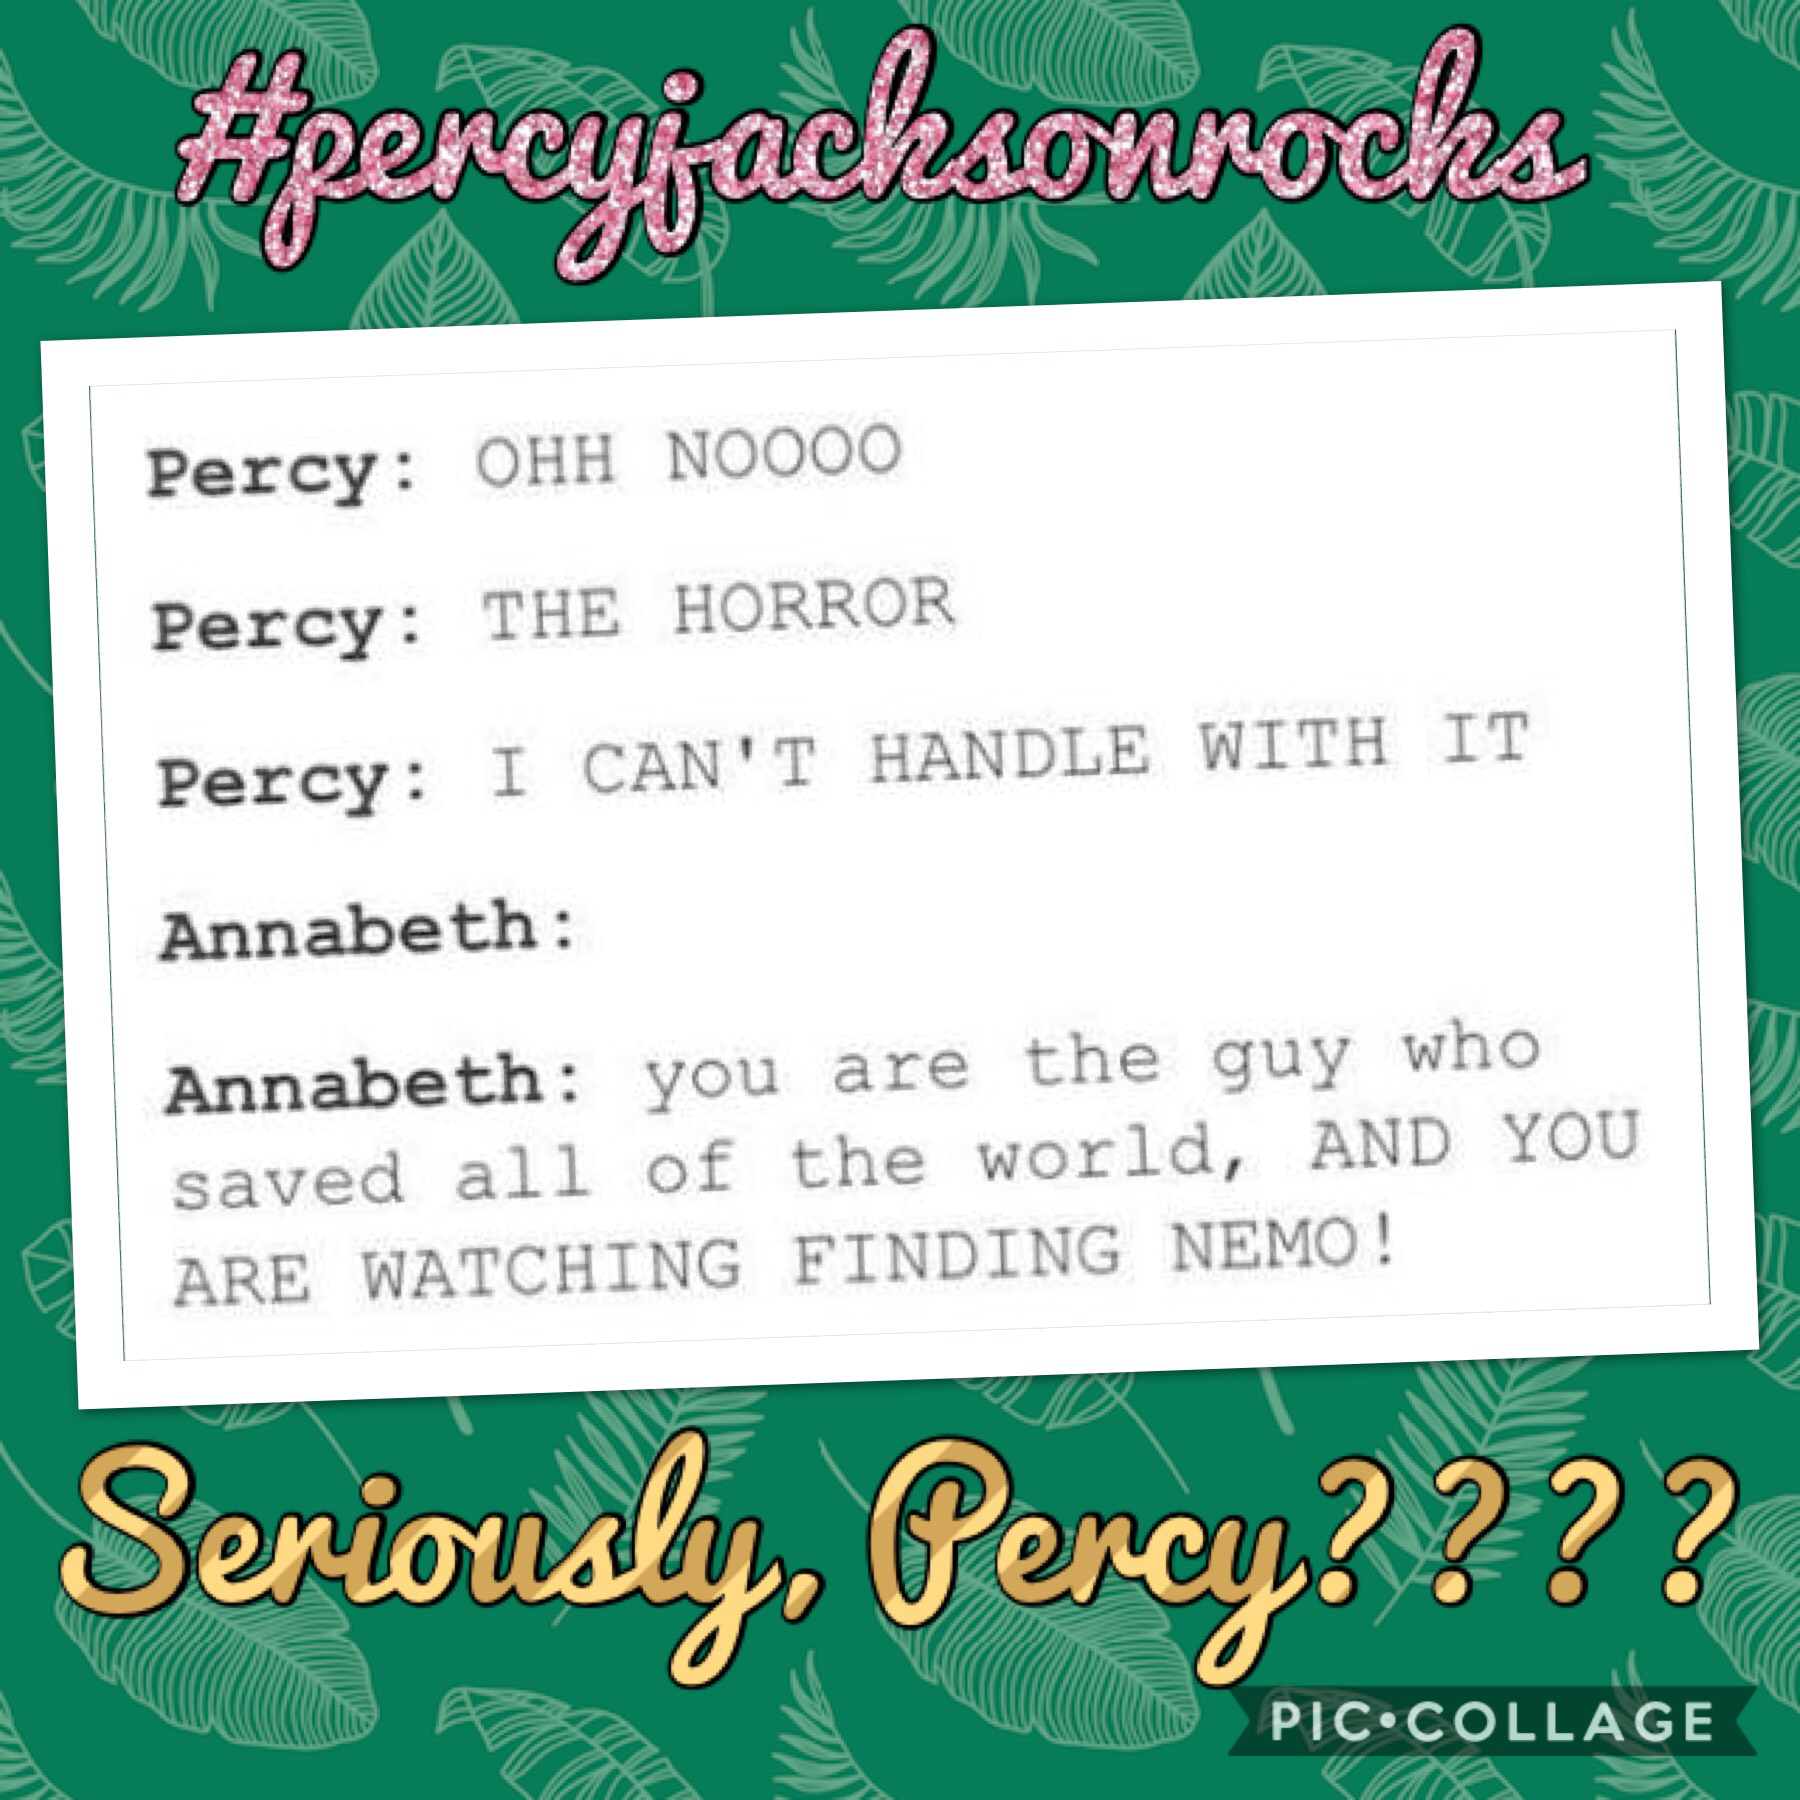 Seriously, Percy??????? U should be able to handle Finding Nemo……